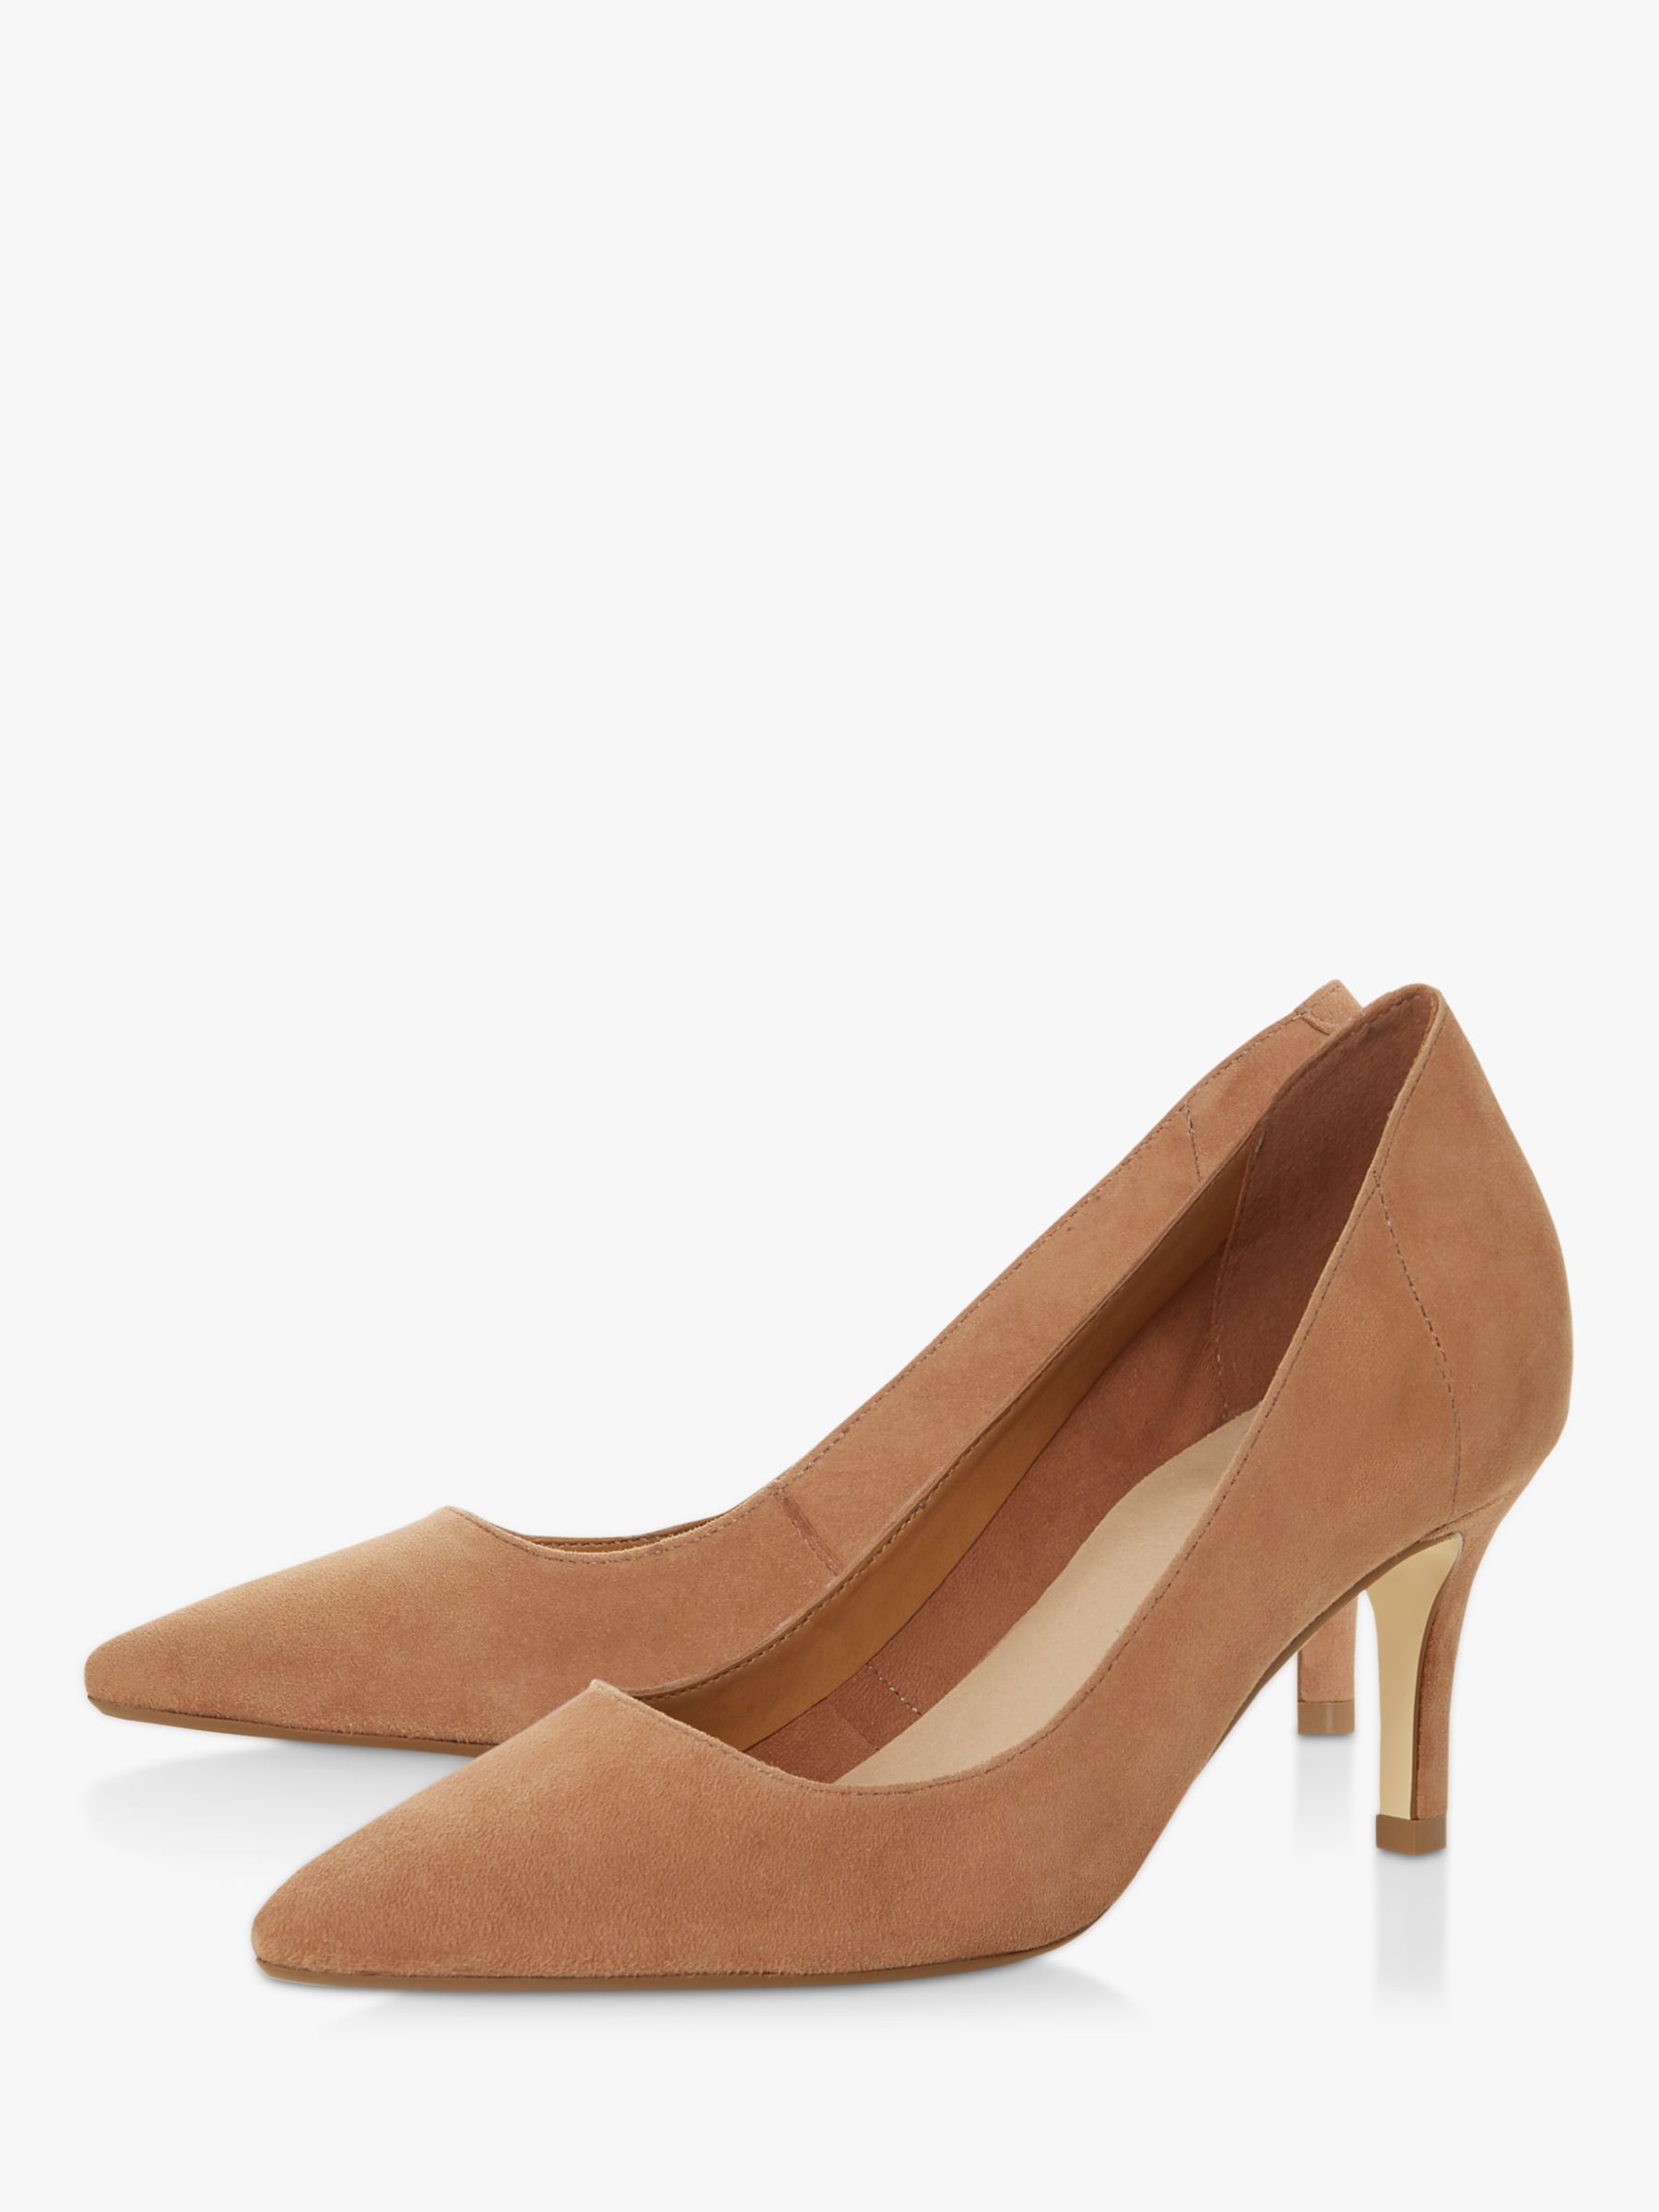 Dune Andina Suede Court Shoes, Camel at John Lewis & Partners